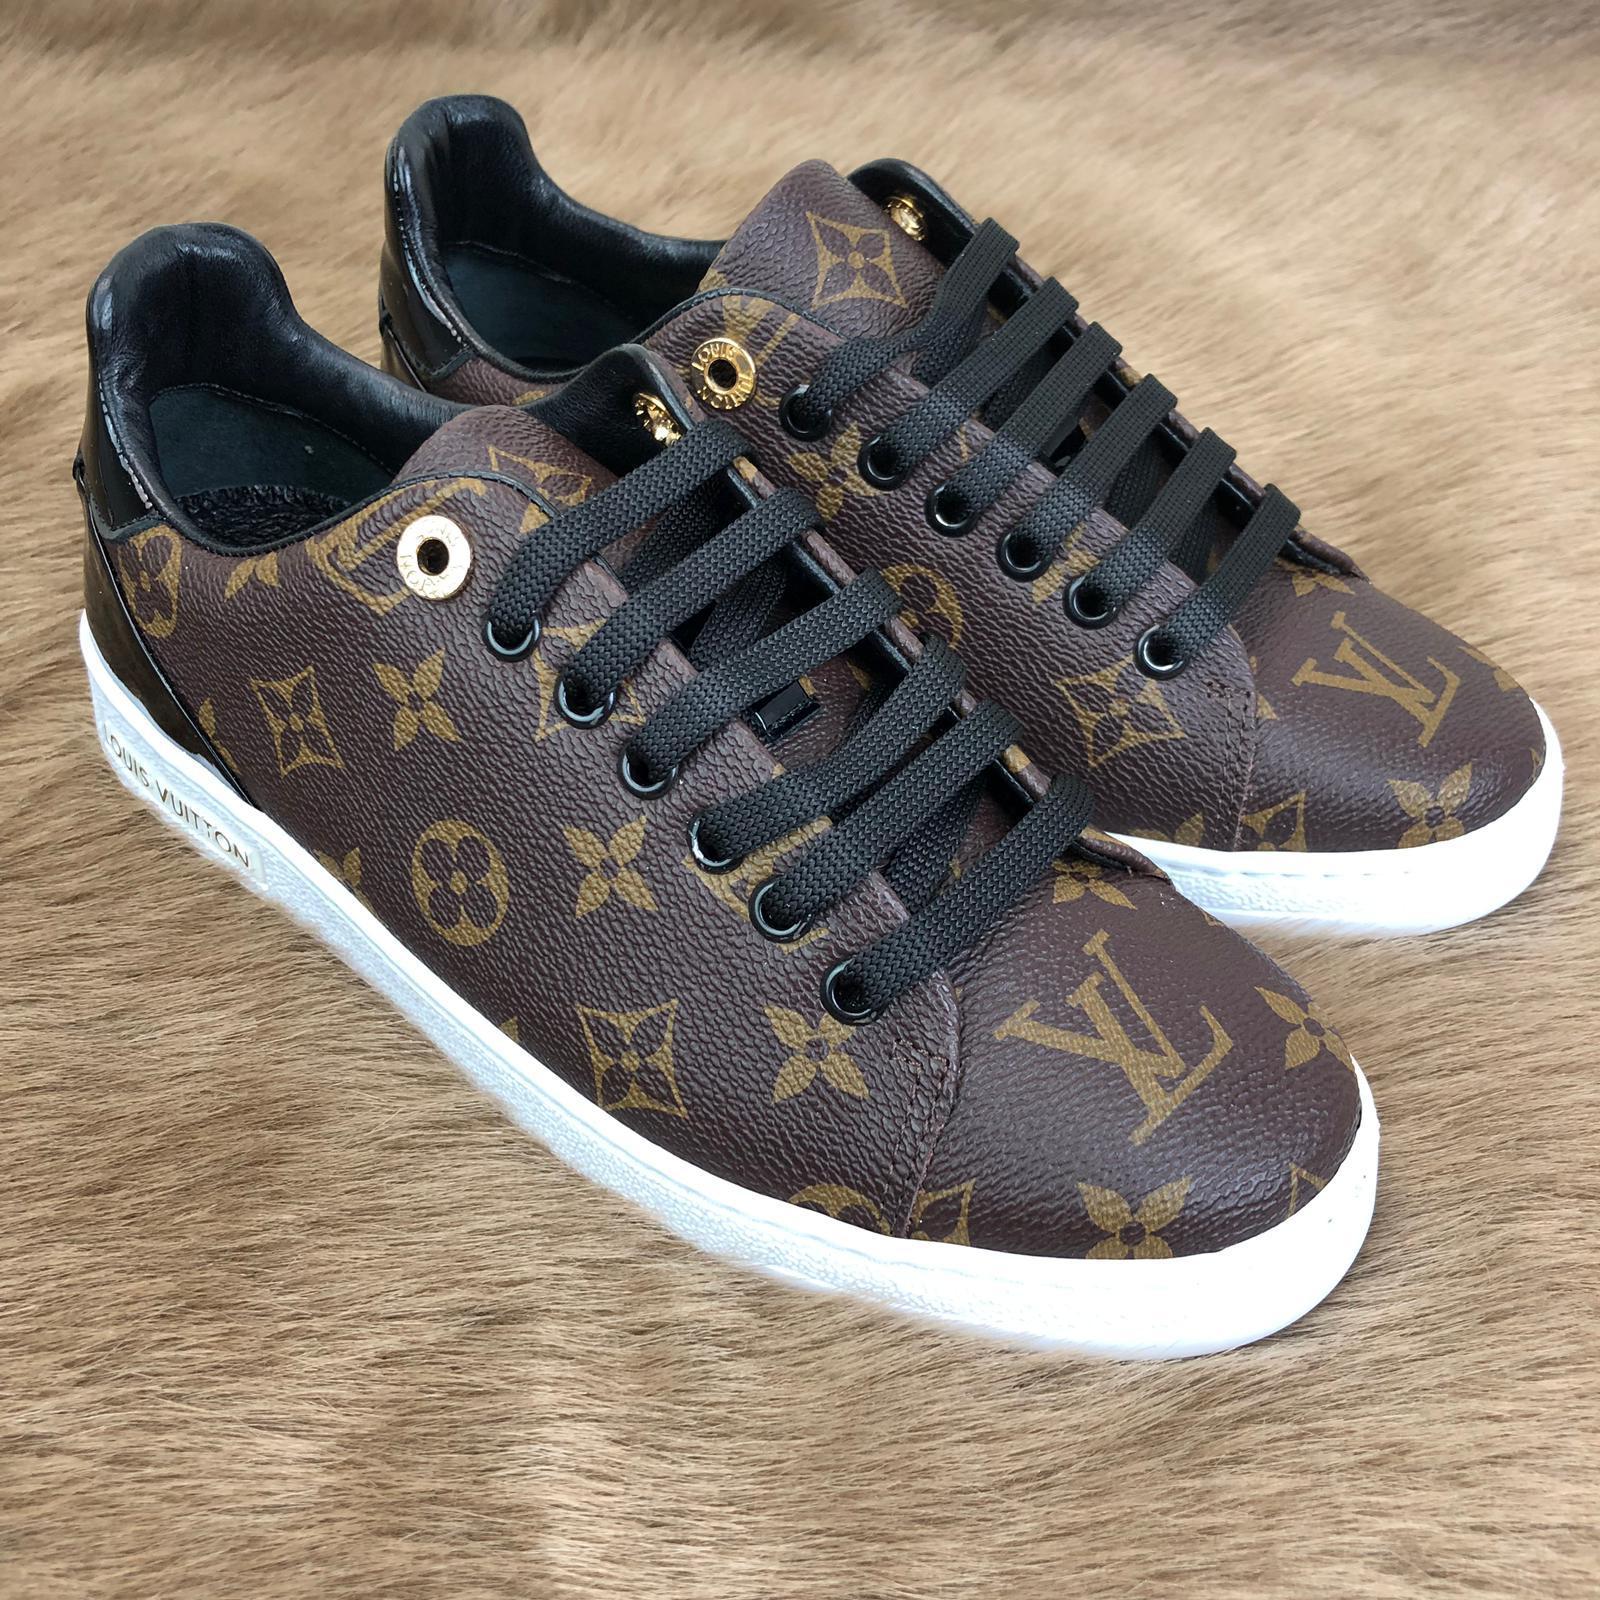 front row sneakers louis vuitton